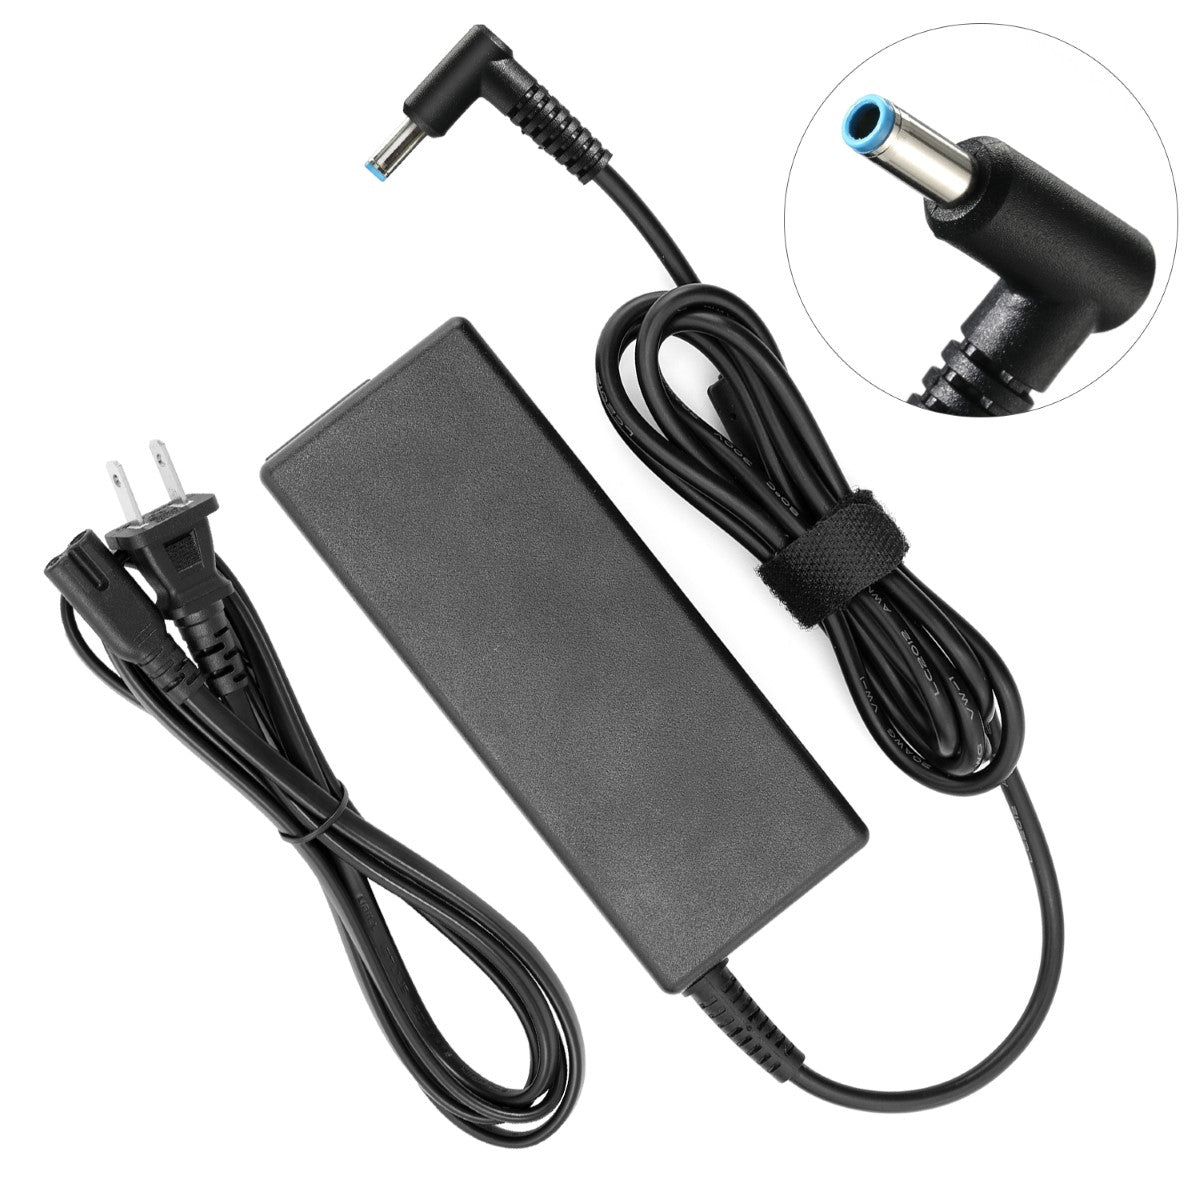 AC Adapter Charger for HP Envy Touchsmart 17-j029nr Notebook.